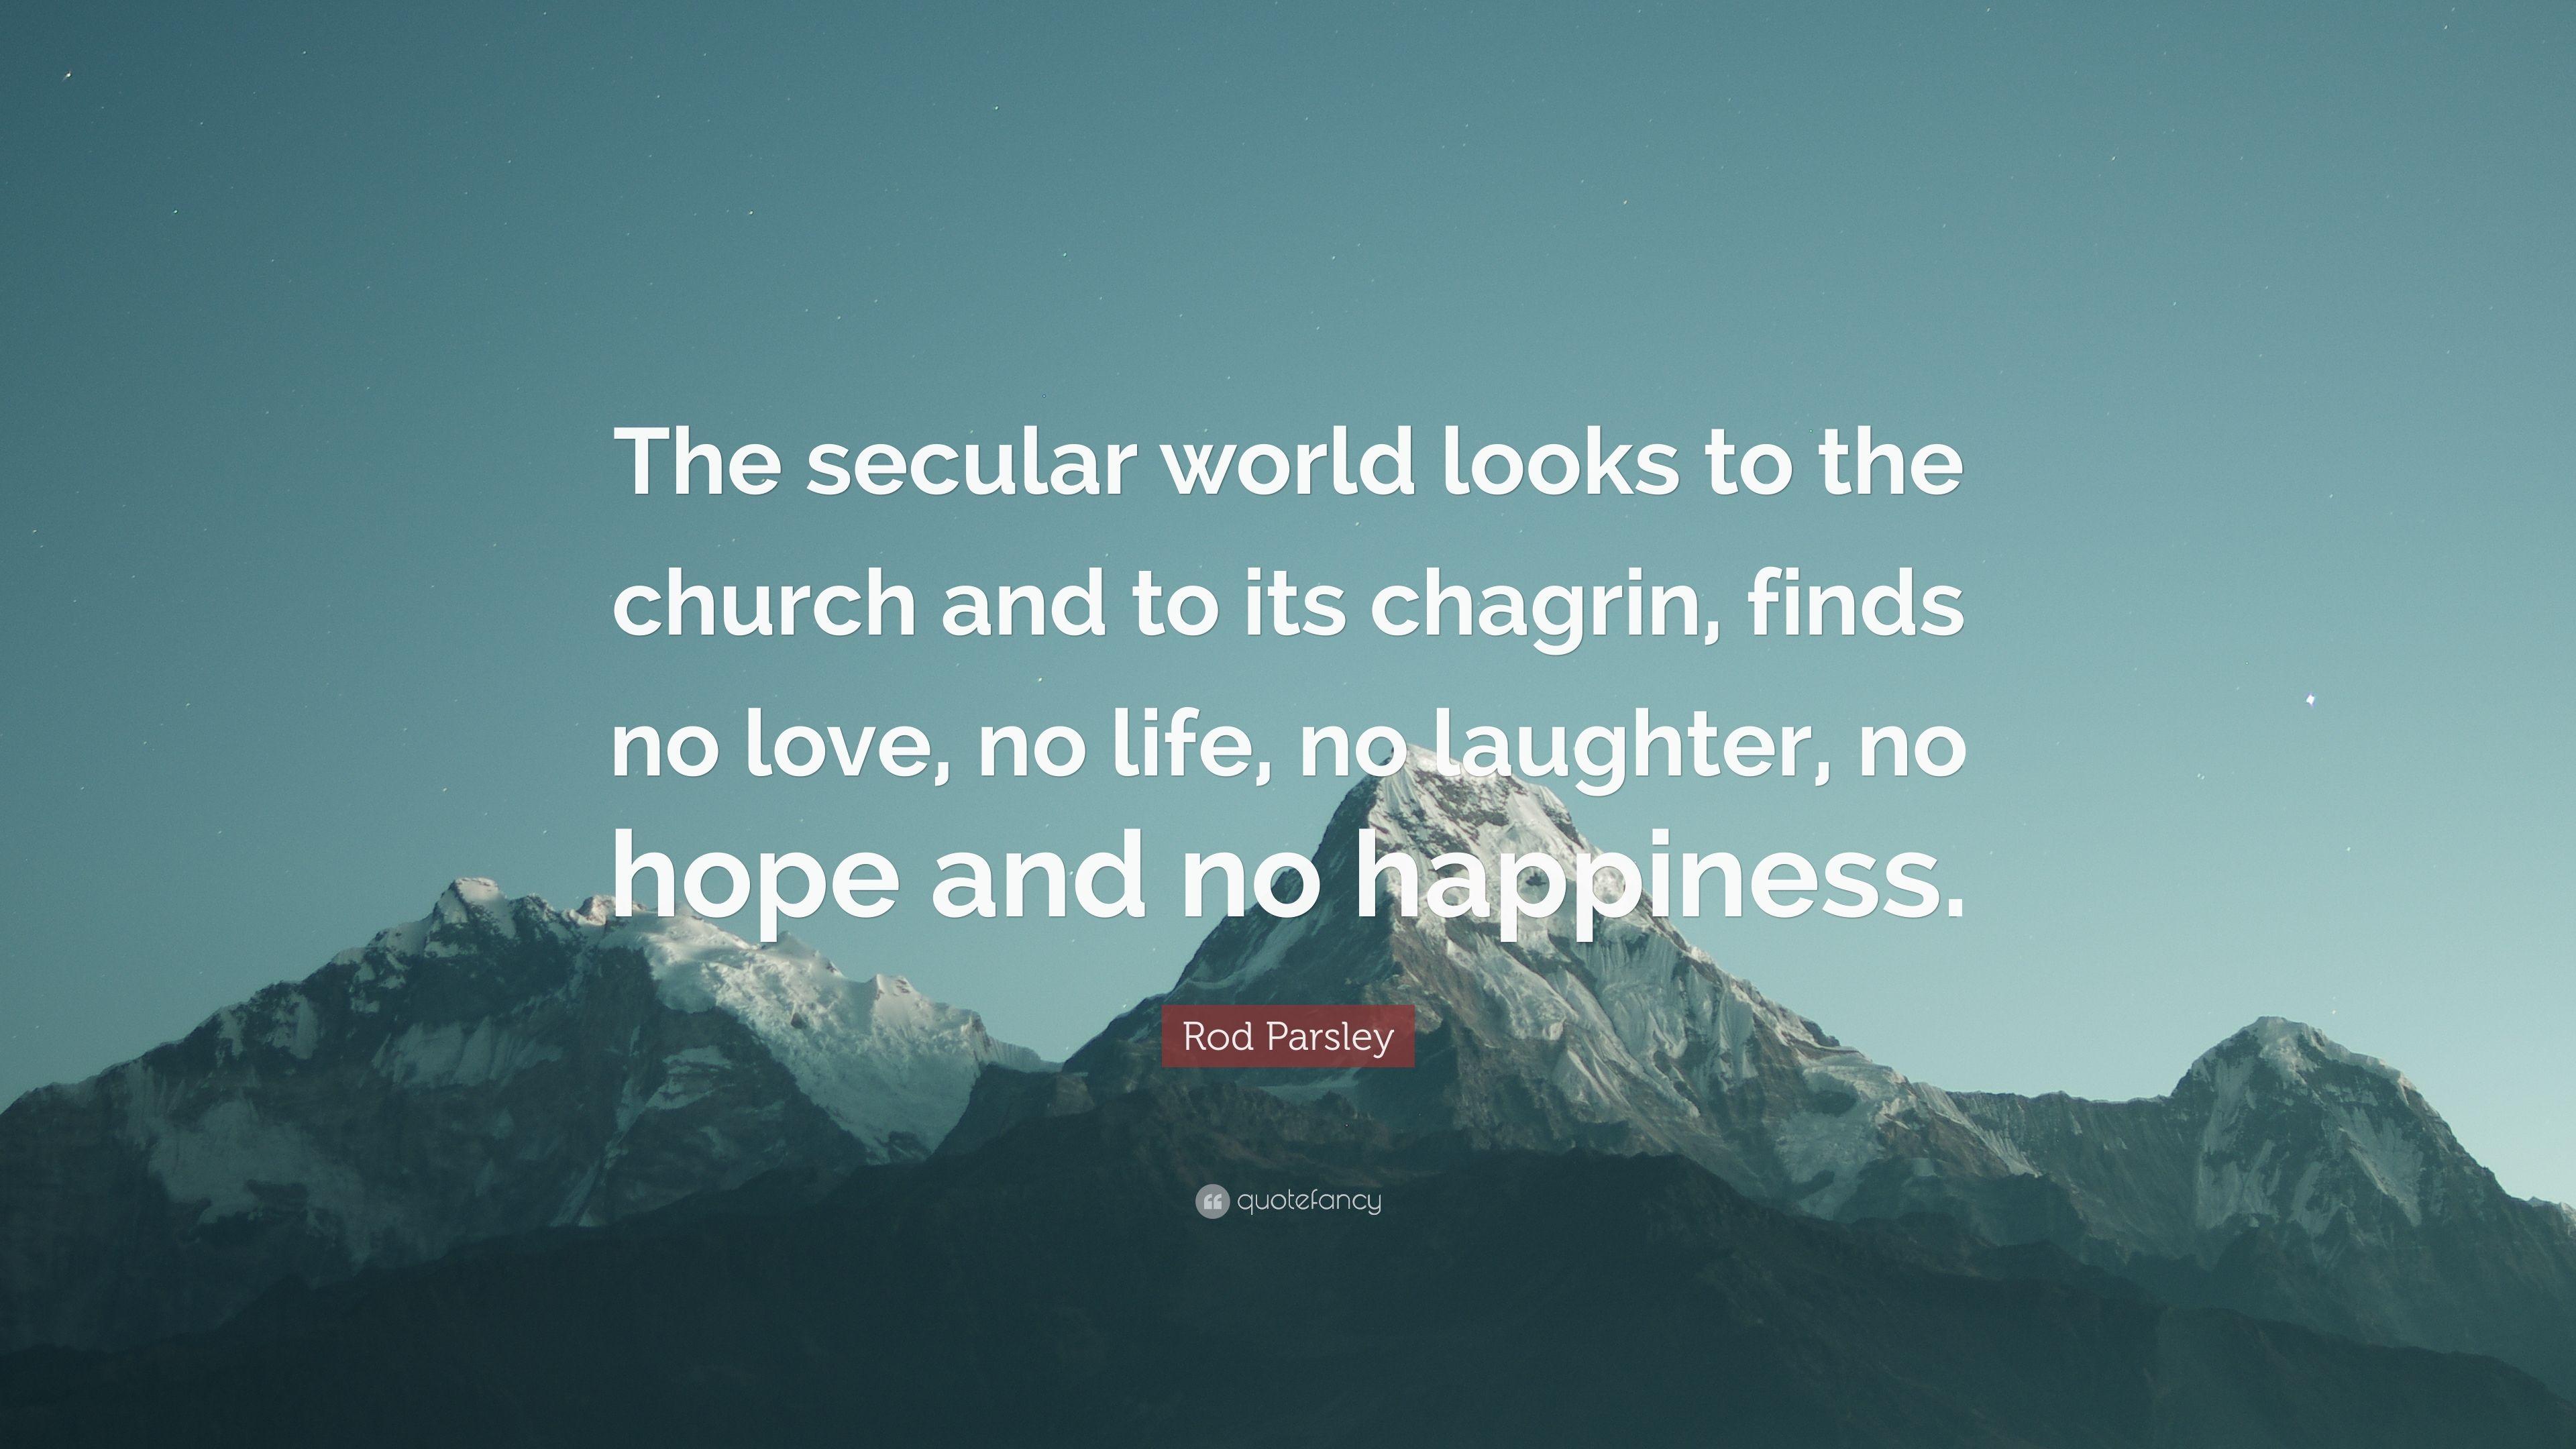 Rod Parsley Quote: “The secular world looks to the church and to its